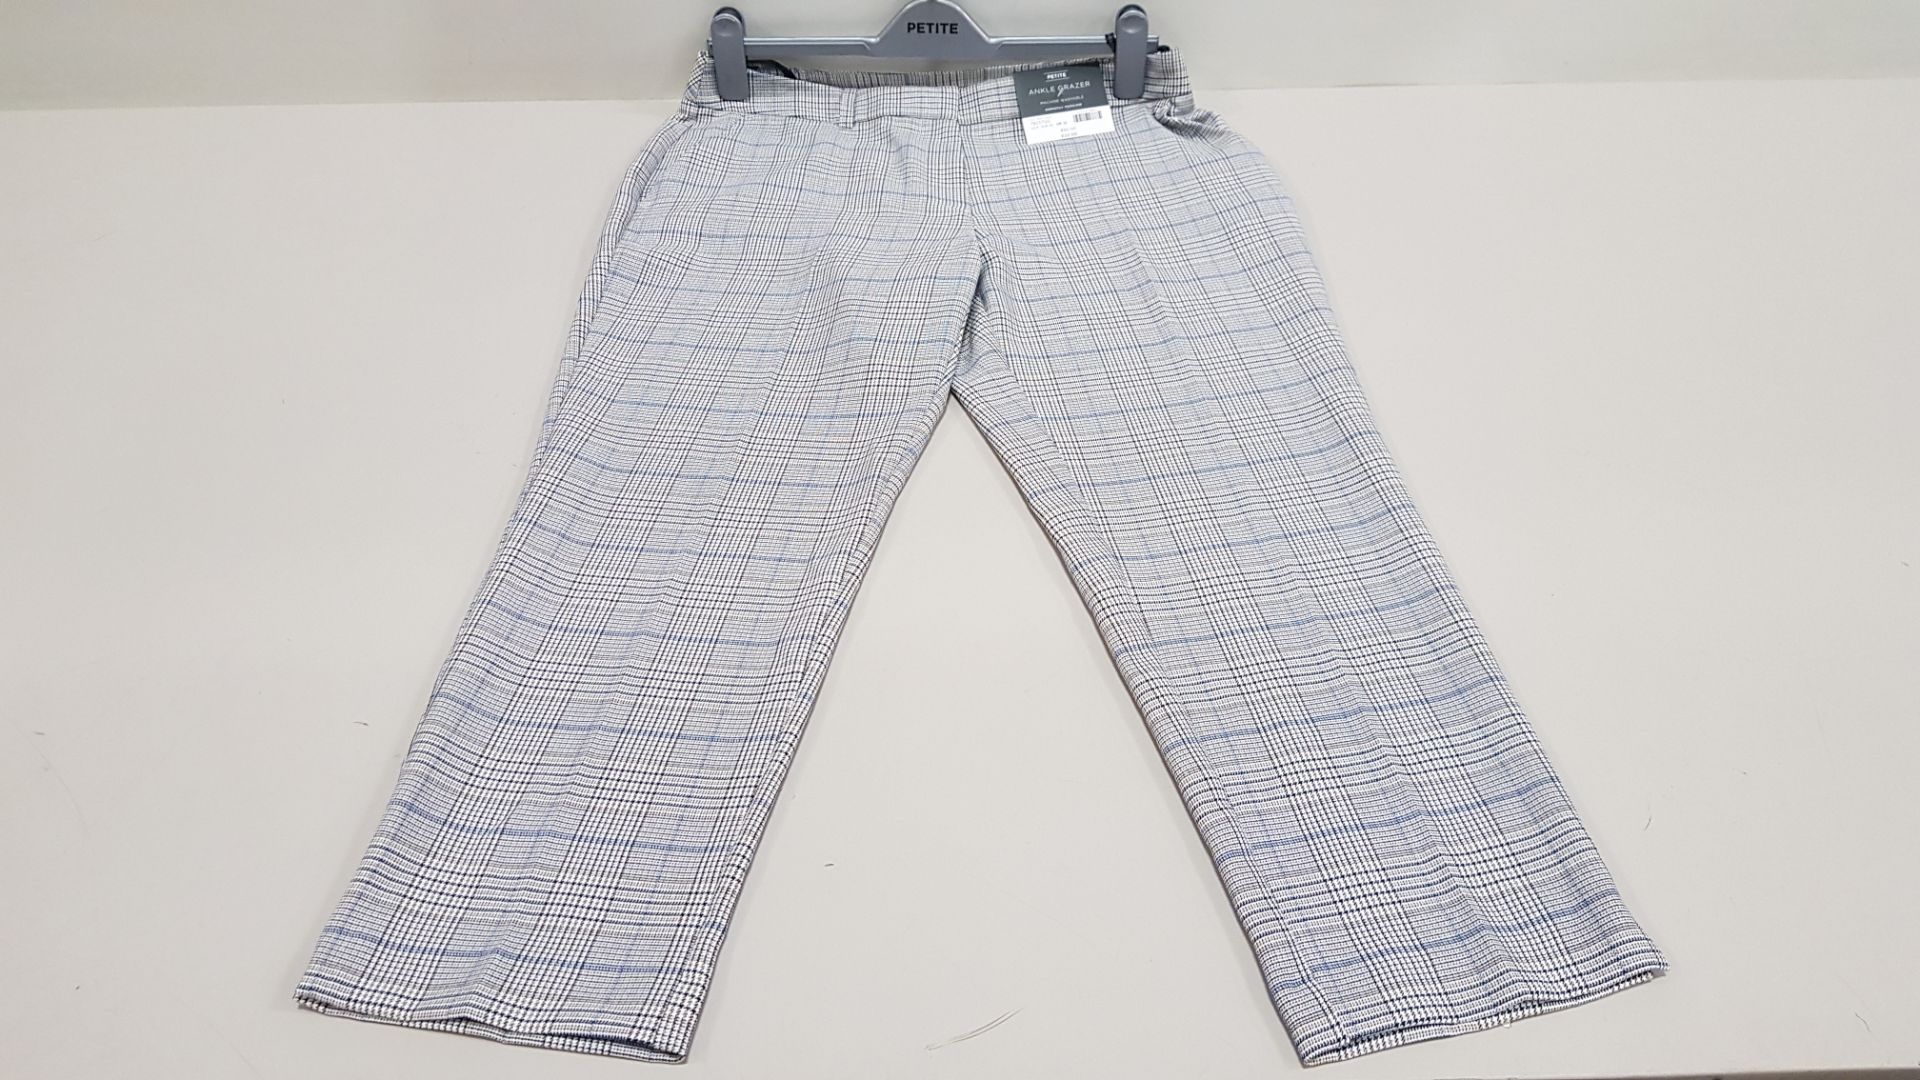 20 X BRAND NEW DOROTHY PERKINS PETITE CHEQUERED ANKLE GRAZER TROUSERS IN SIZES 4, 6, 8, 10 AND 14